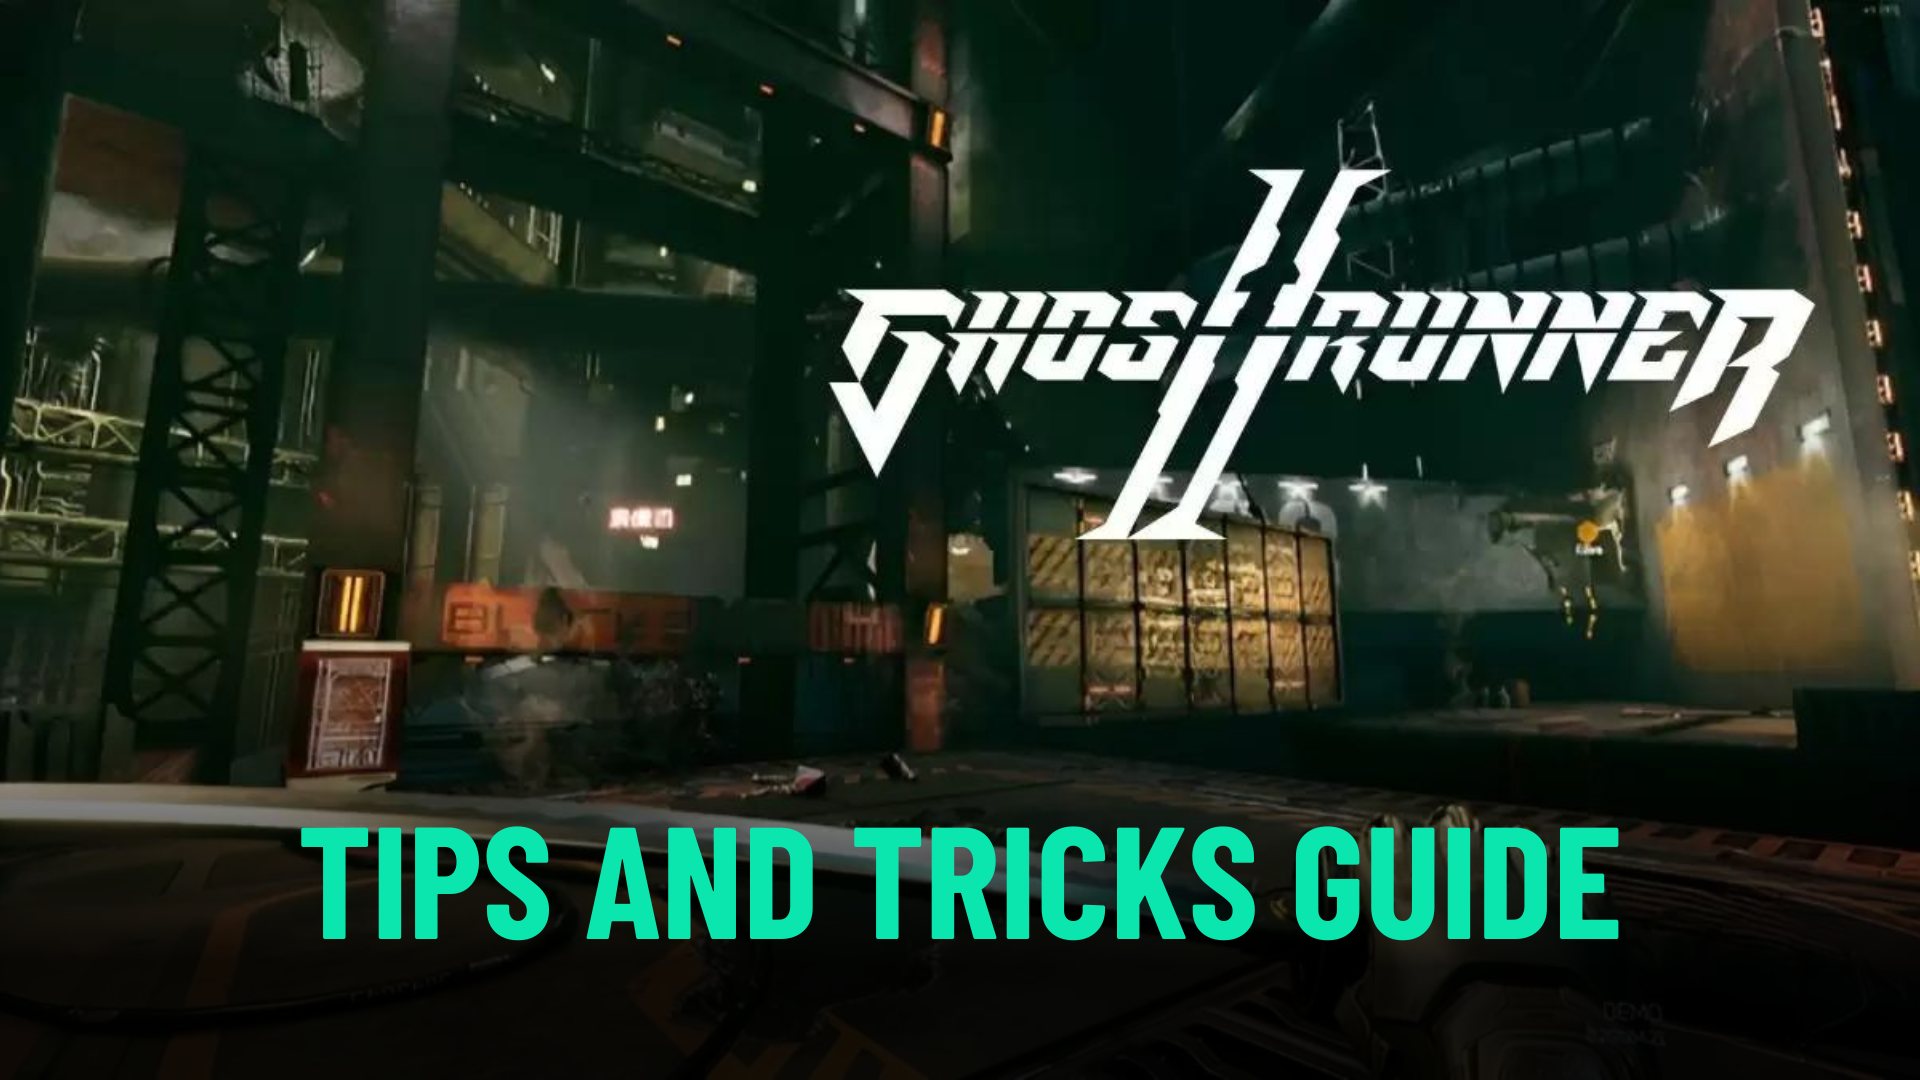 Ghostrunner 2 – Tips and Tricks Guide